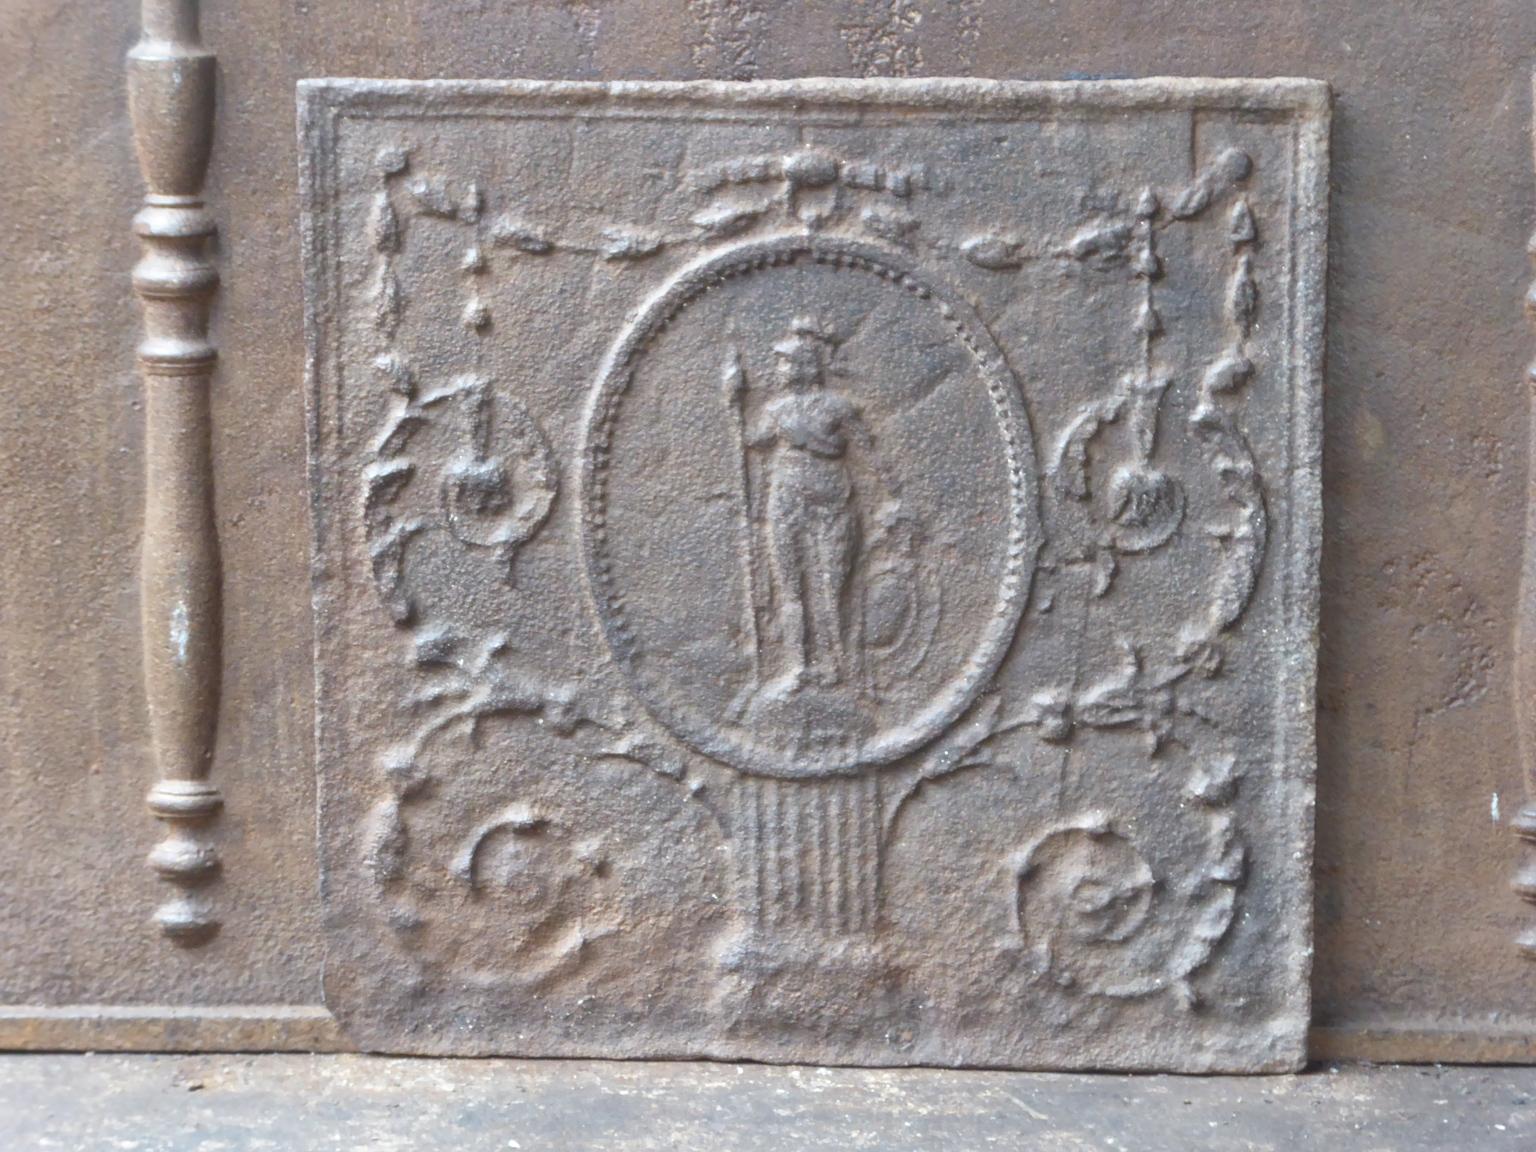 18th-19th century French Neoclassical fireback with the goddess Minerva. Goddess of knowledge, intellect and ingenuity of the human spirit. She is often depicted with an owl, symbol of wisdom. 

The fireback has a natural brown patina. Upon